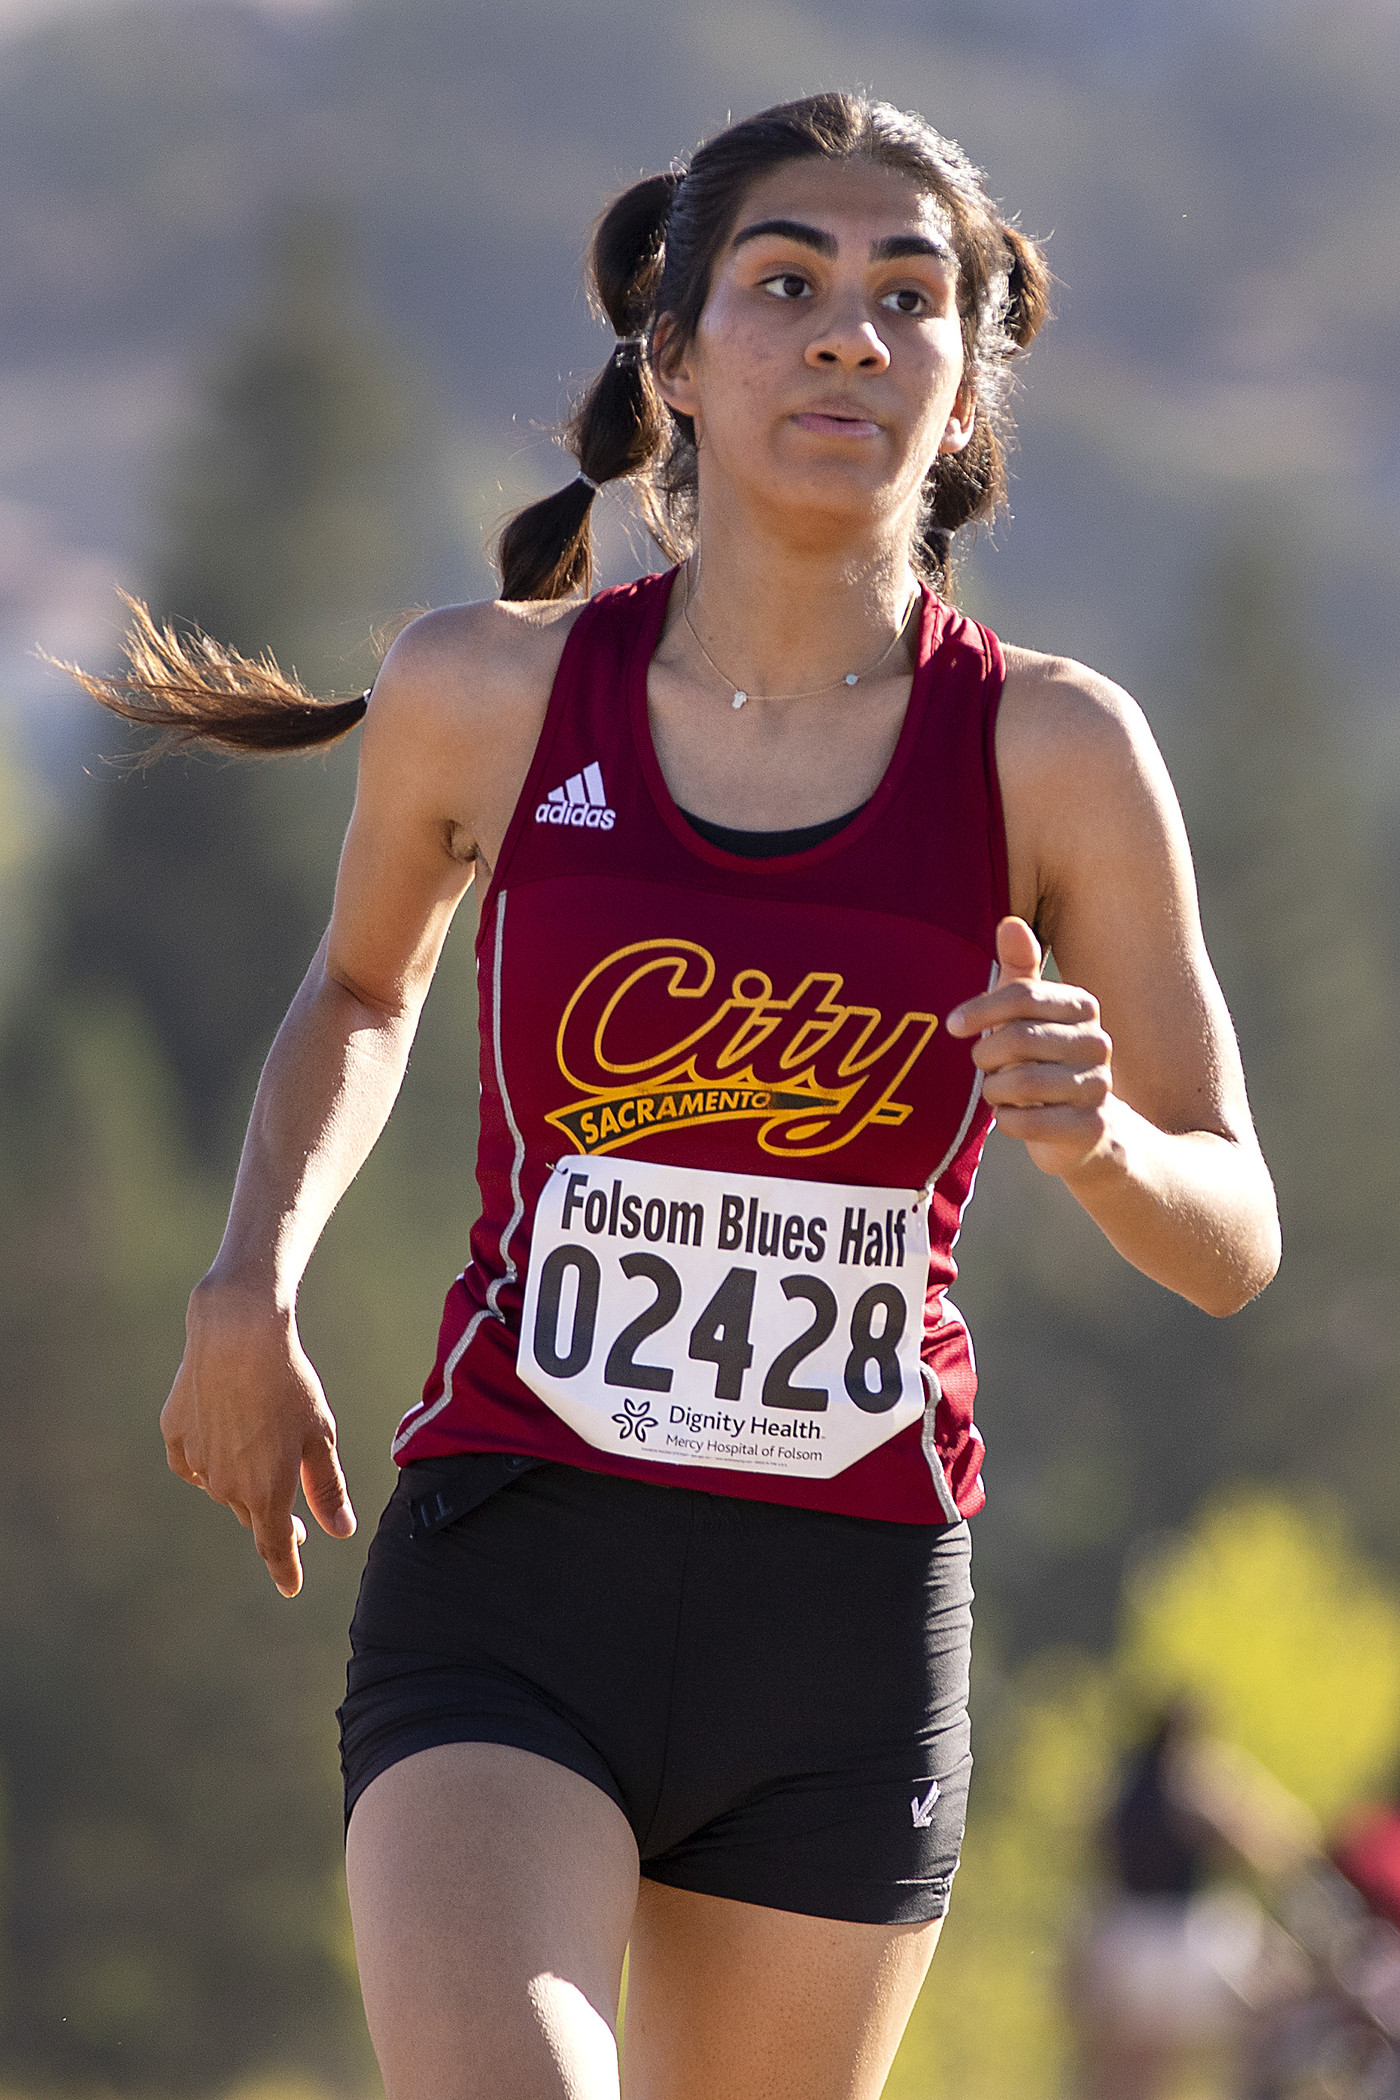 Campos finishes 11th in the Urban Cow 5K female division and takes 2nd in the 19-24 age group